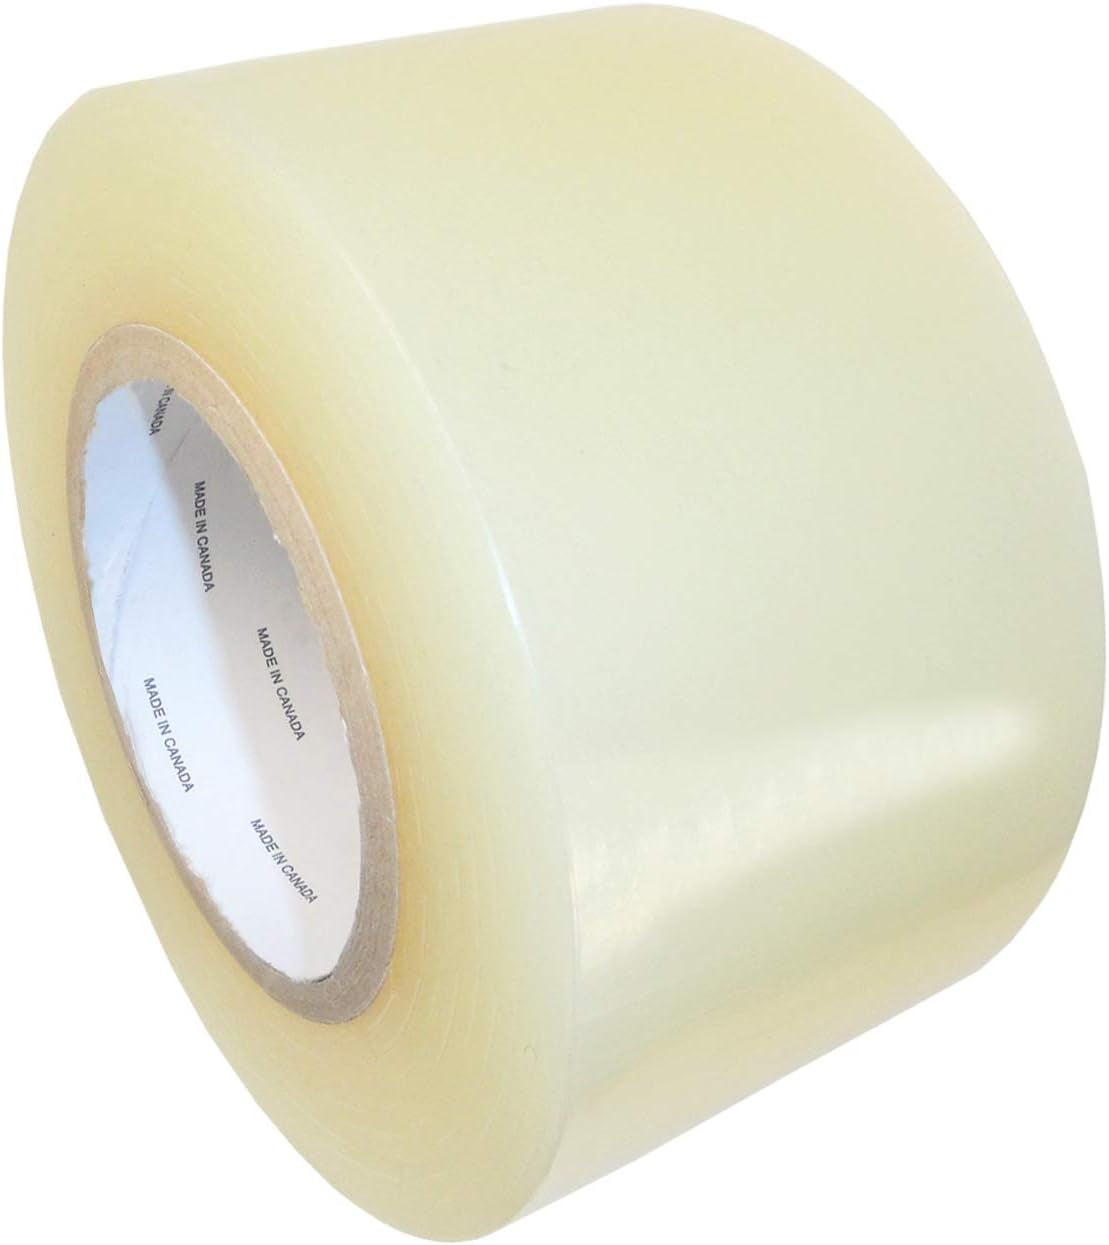 T.R.U. LDPE Heavy-Duty Greenhouse Polyethylene Repair Weatherseal Film Tape. Long Term UV Exposure Ideal for Sealing and Seaming. (Clear, 1" X 36 Yards)